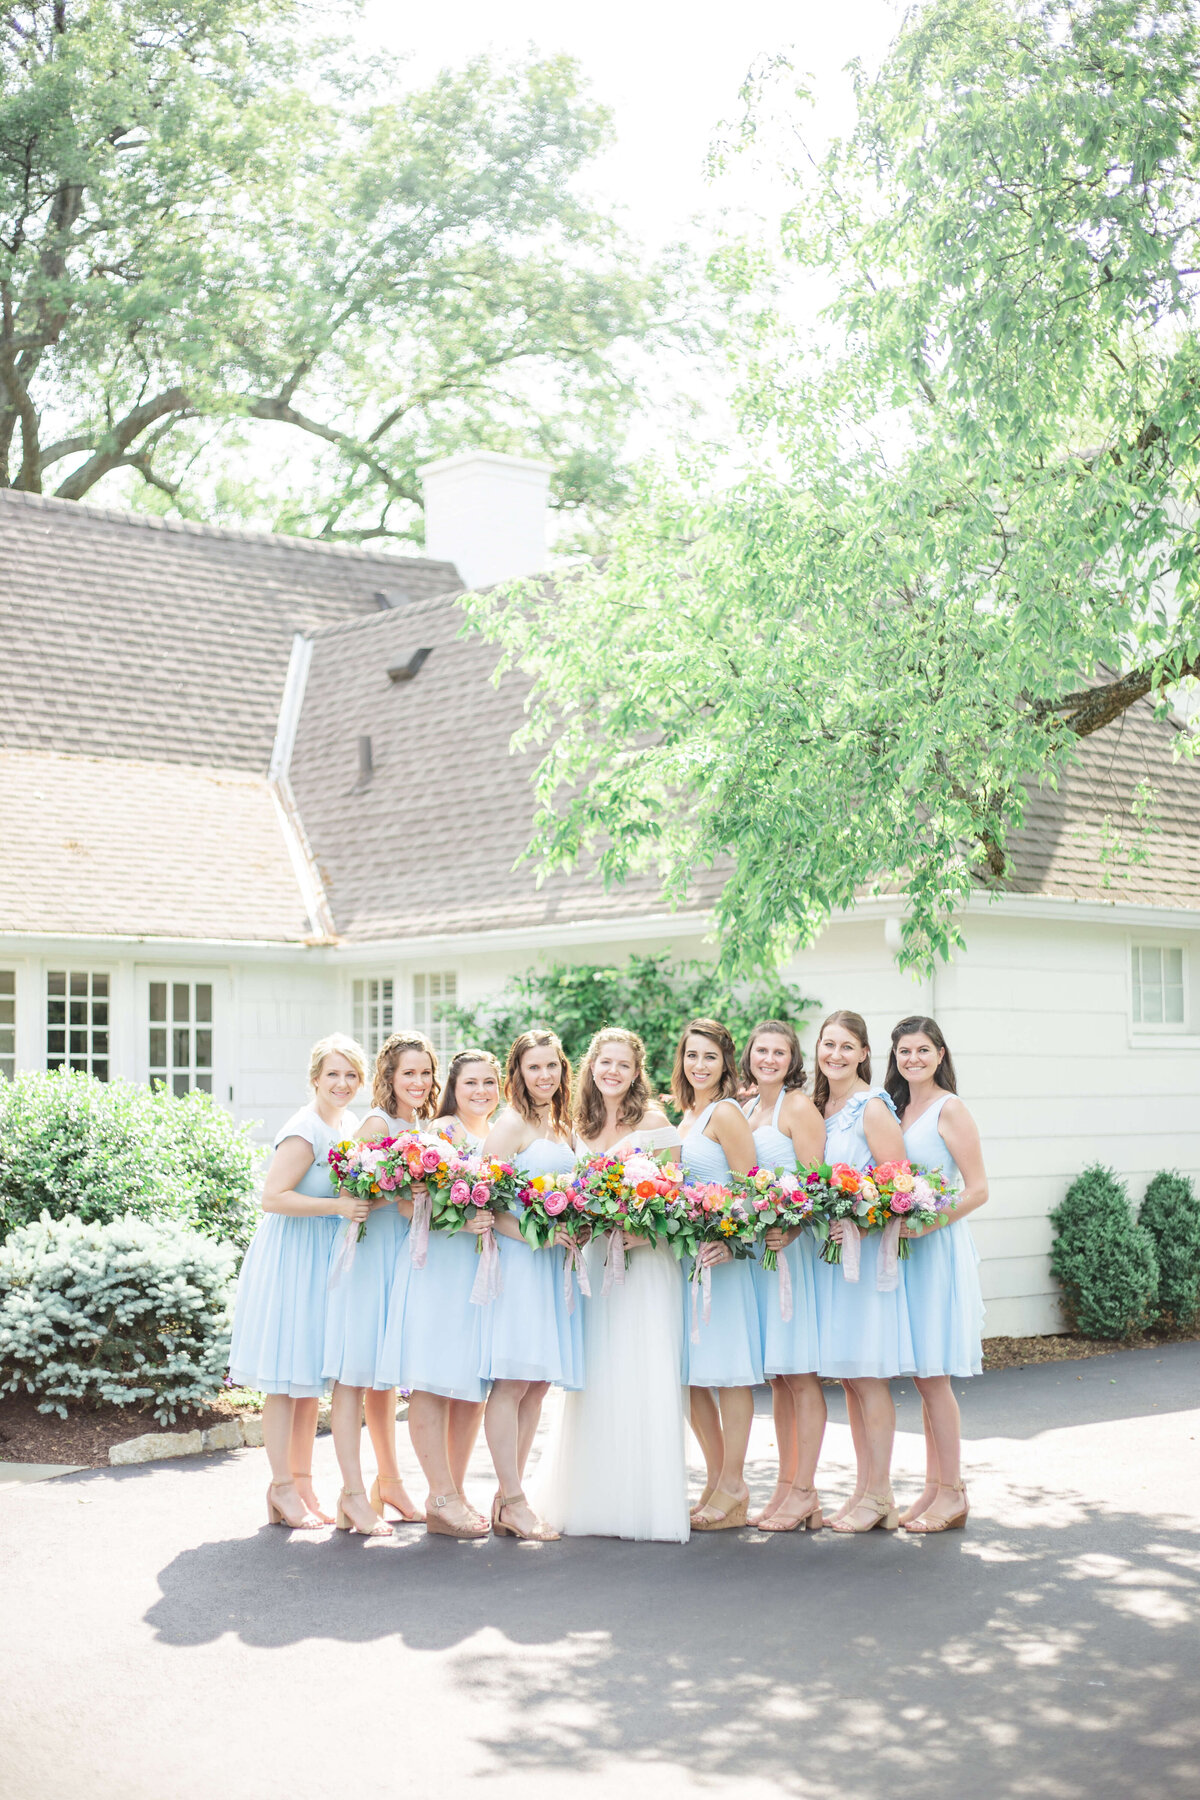 Bride-and-bridesmaids-outside-on-wedding-day-Bethany-Lane-Photography-3